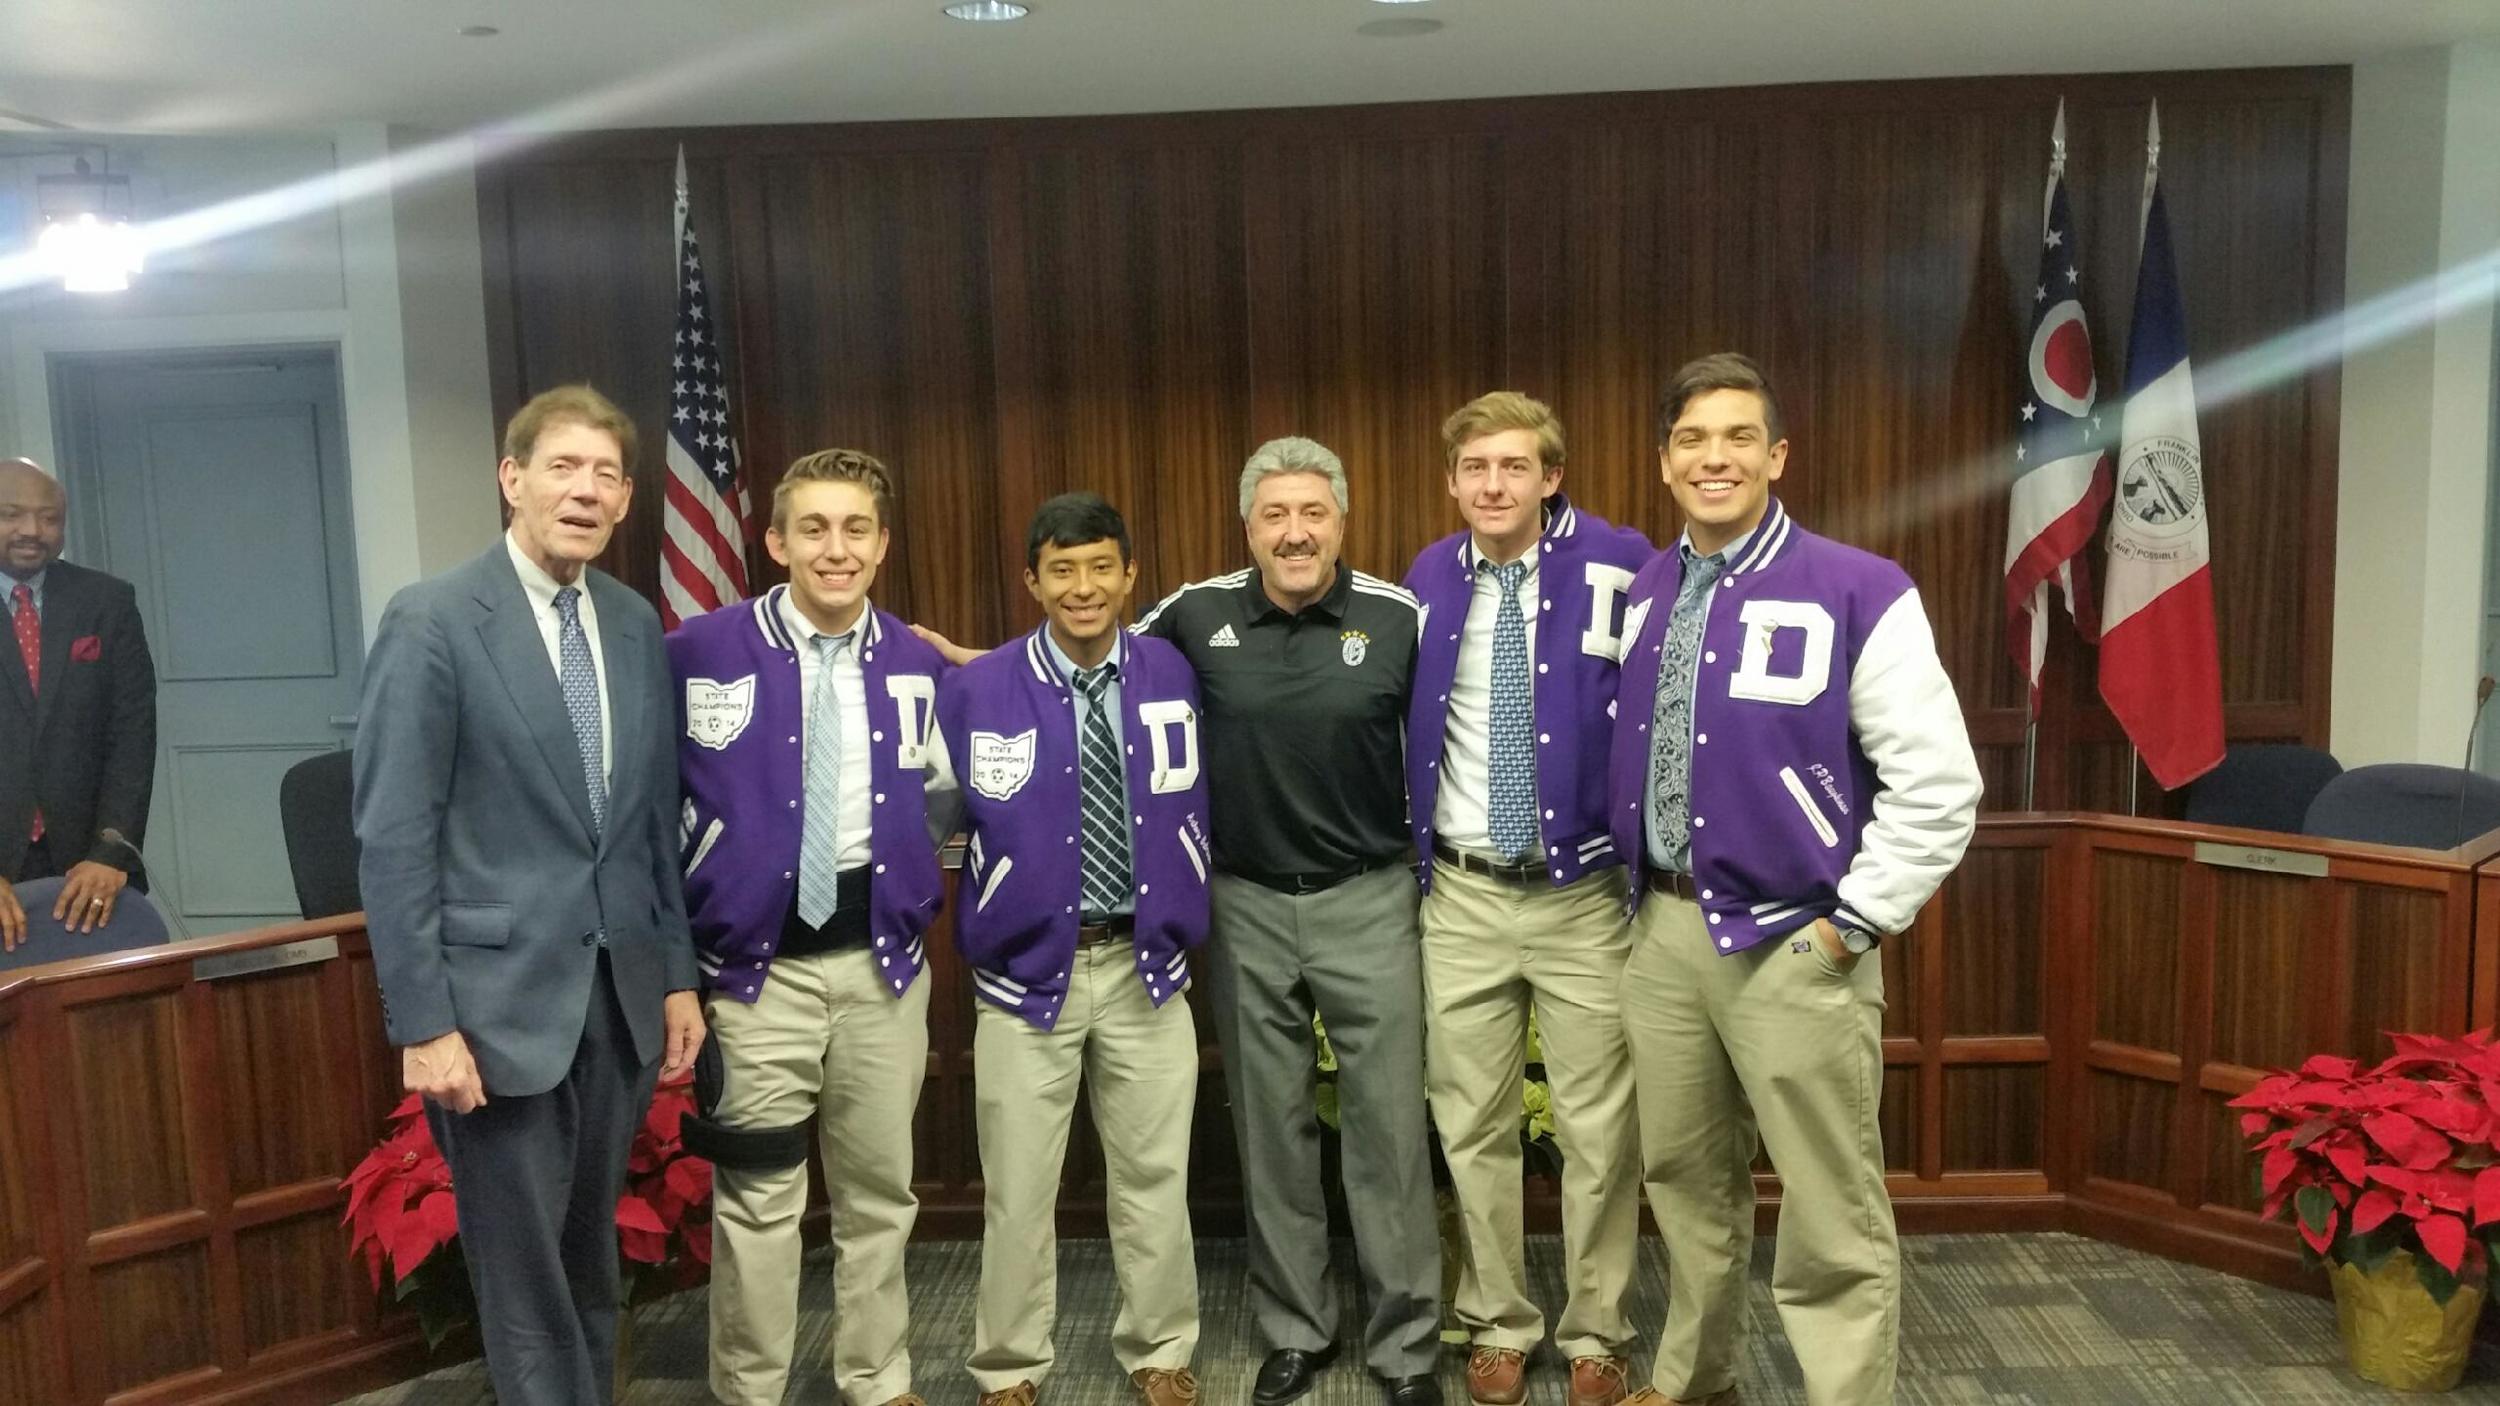 2015 team members with SFD alumnus and Franklin County Prosecutor Ron O'Brien '66